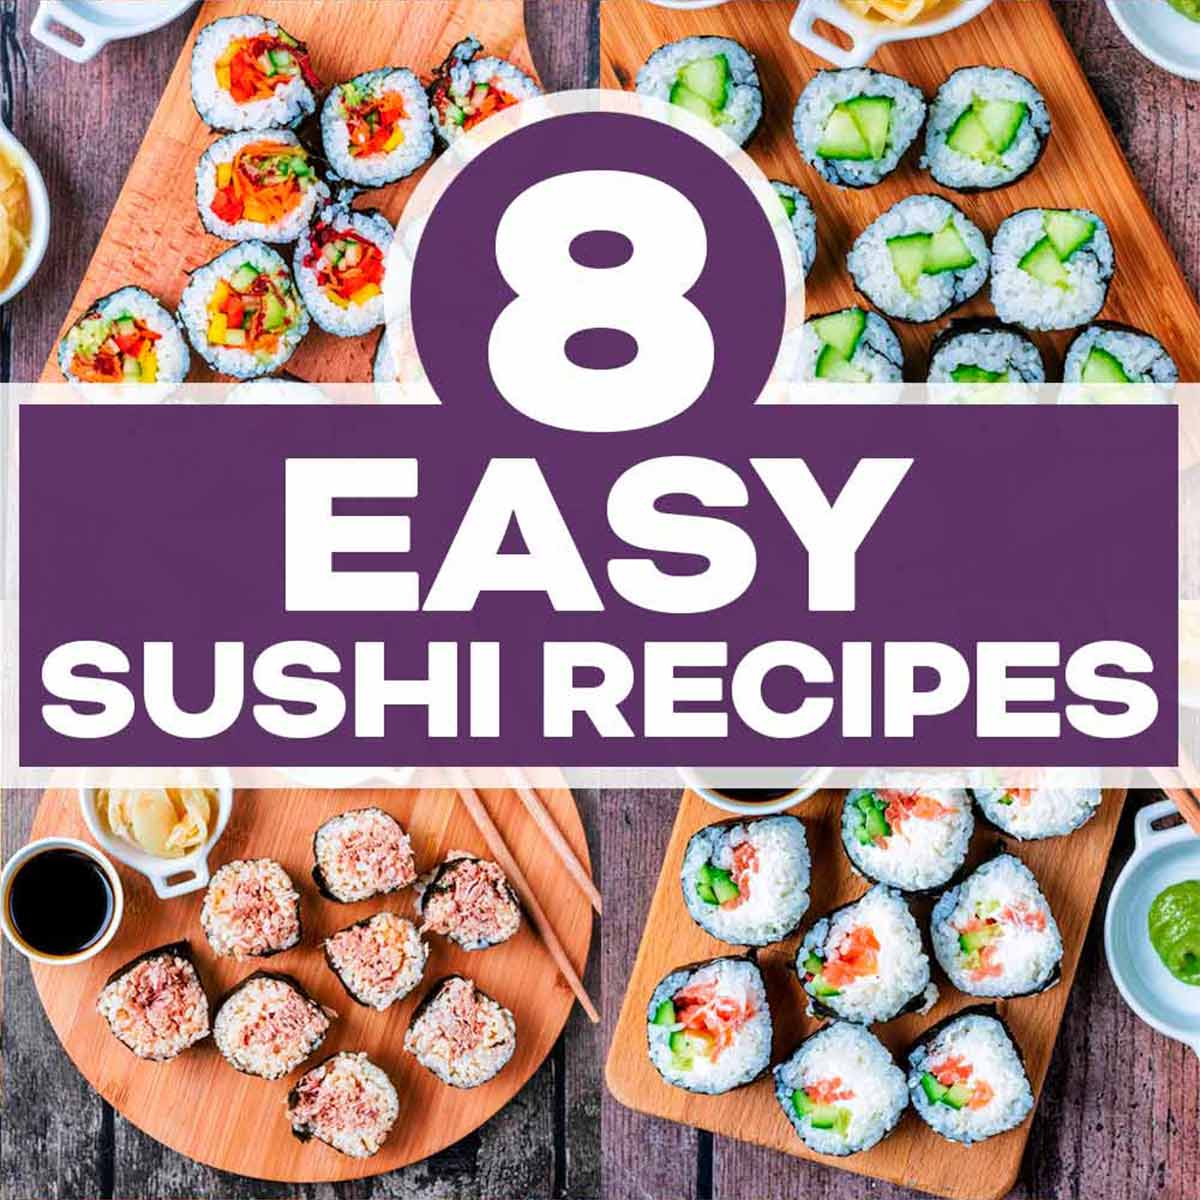 https://hungryhealthyhappy.com/wp-content/uploads/2023/05/sushi-recipes-featured.jpg